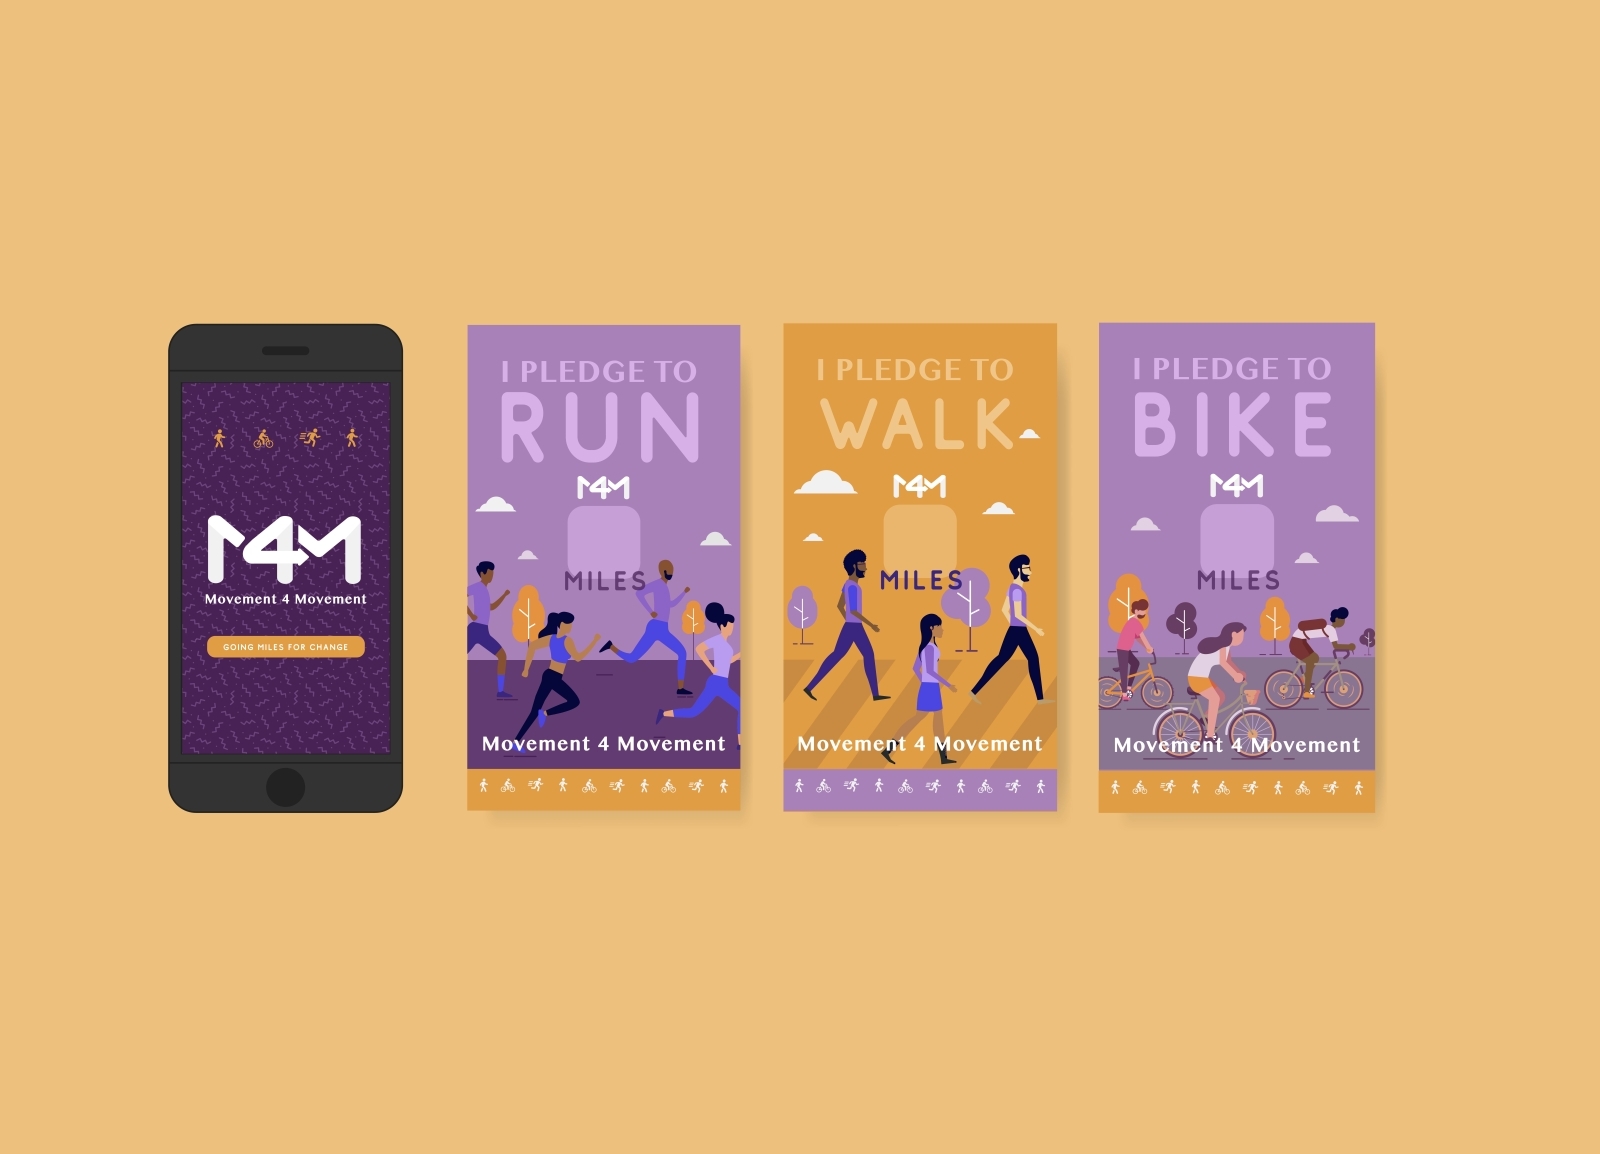 M4m Instagram Story Series By Haley Coyle On Dribbble 2962